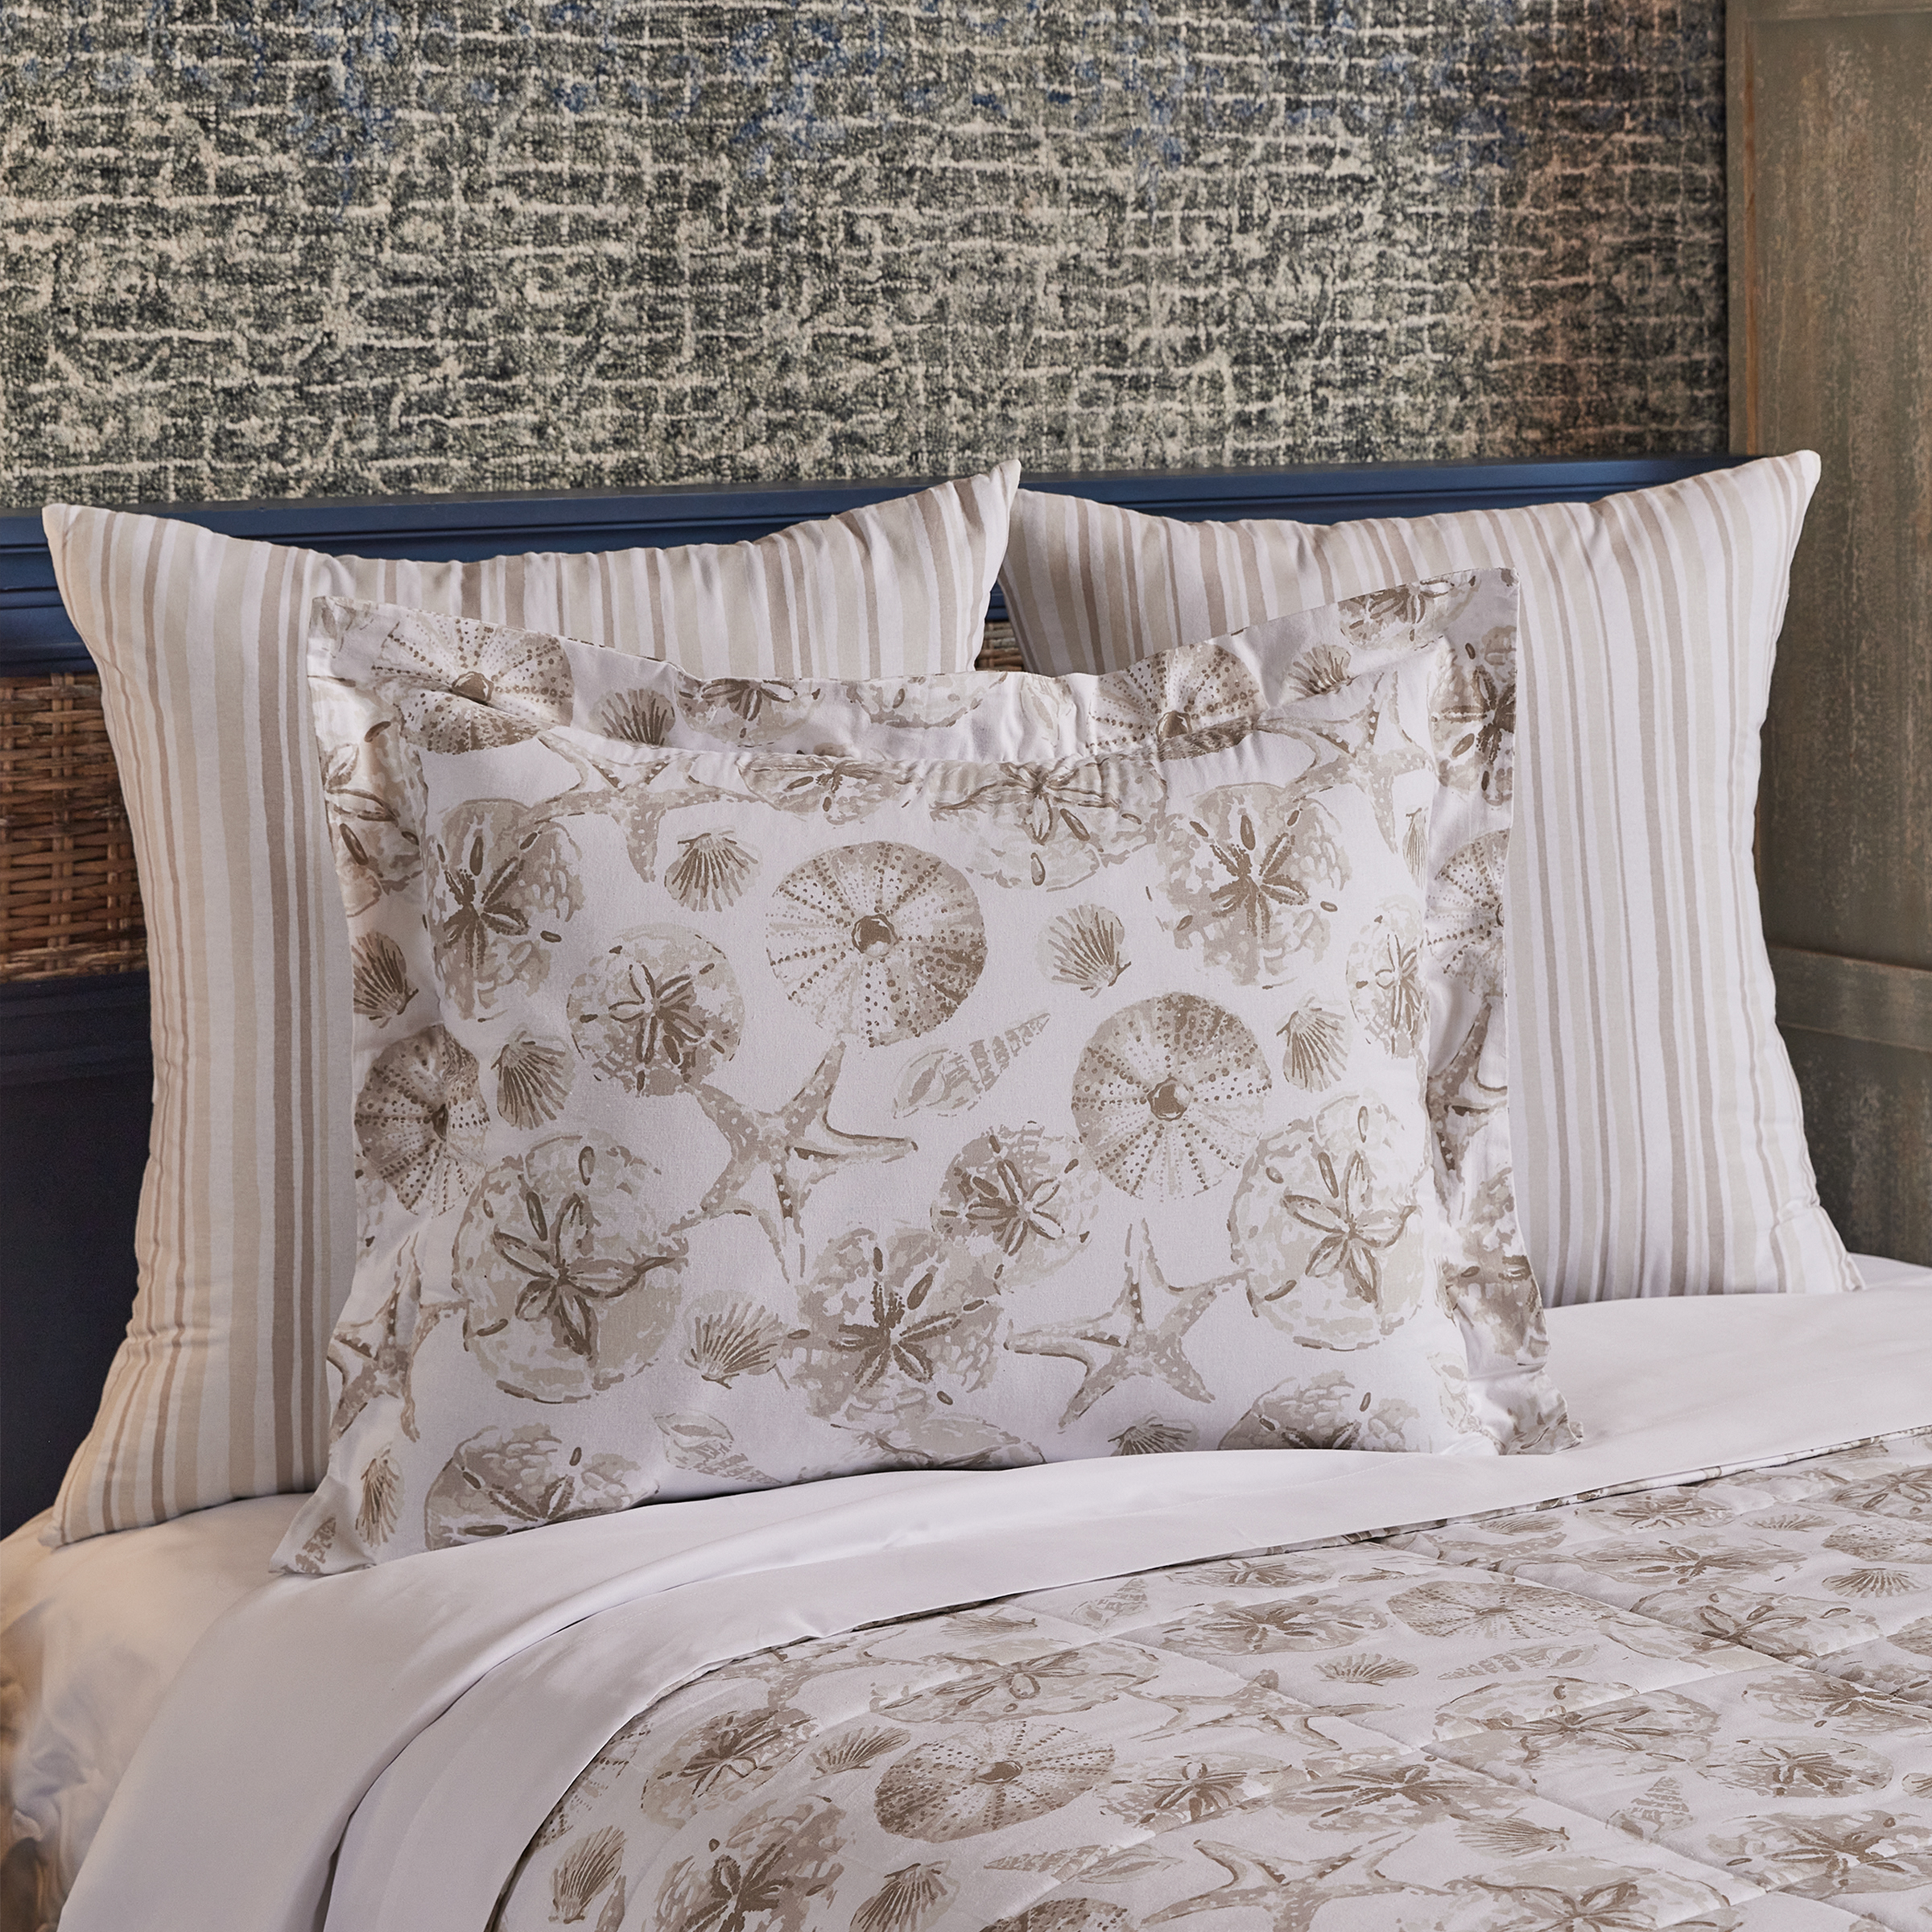 Euro Shams and Pillow Shams for Shell Cove Beach Bedroom Collection